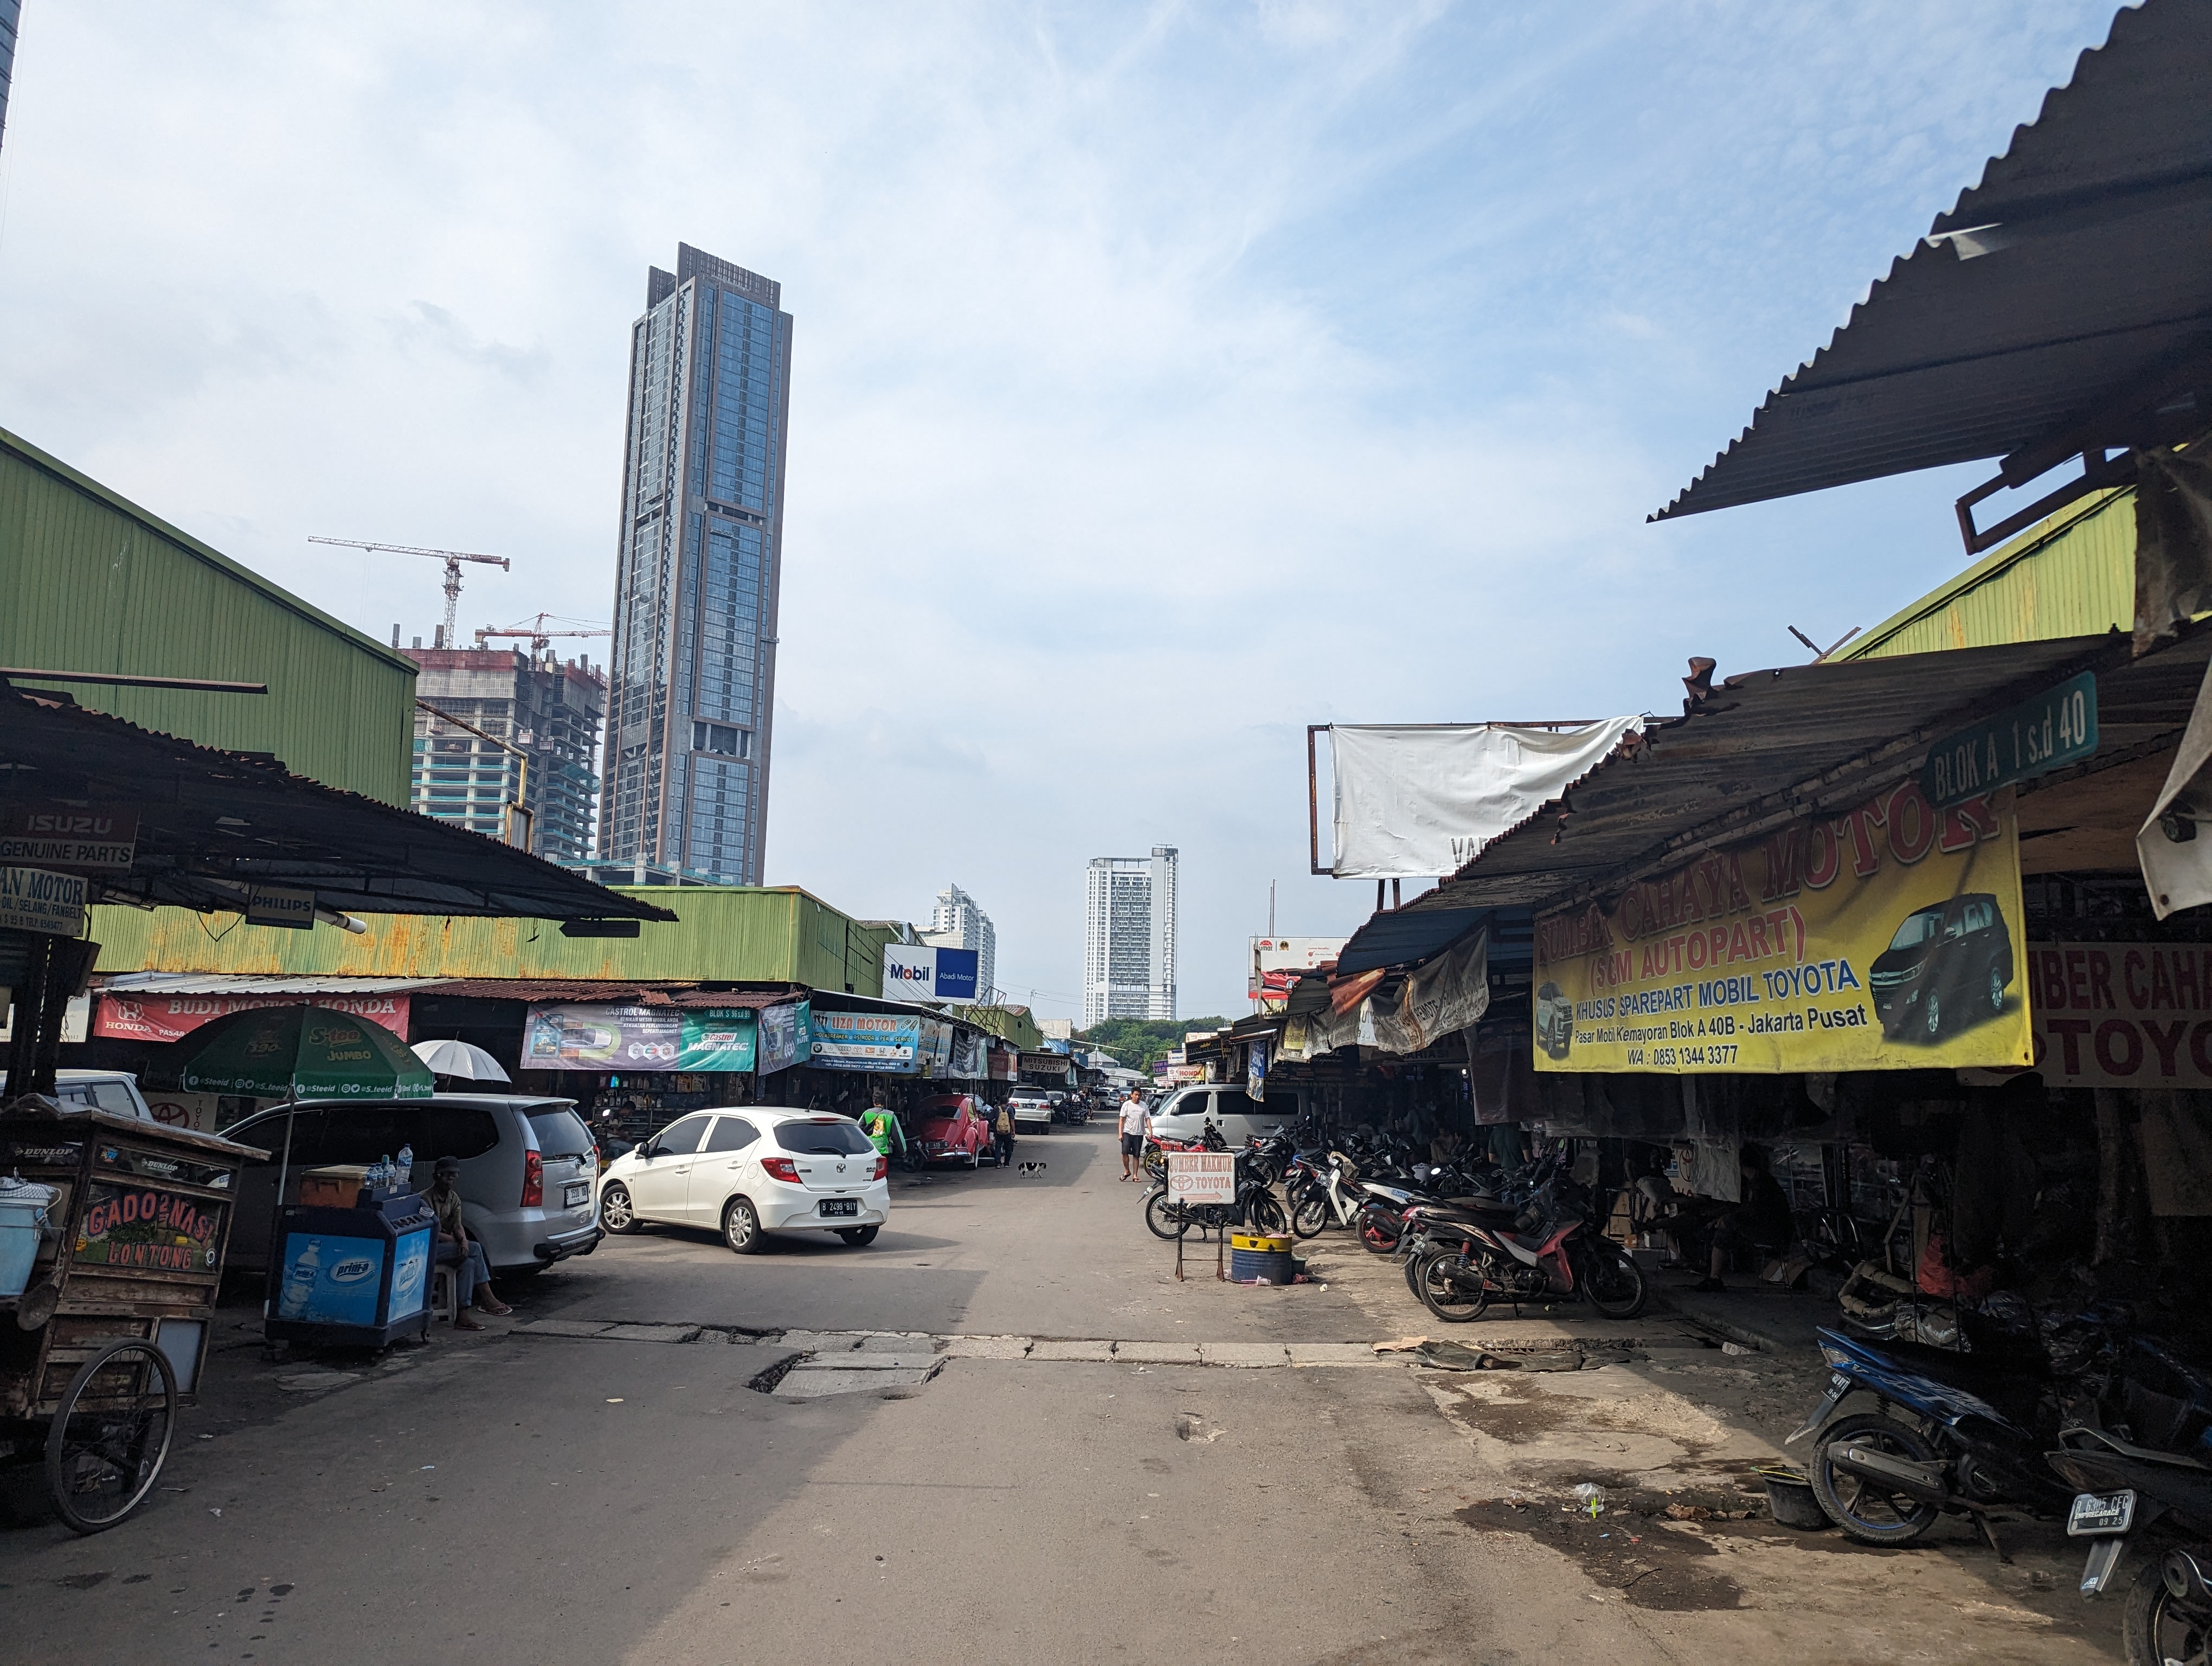 Car repair districts like this one in Jakarta can stretch kilometers on end. Air conditioning repair shops can dominate entire blocks. Photo: Tilden Chao, 2023.